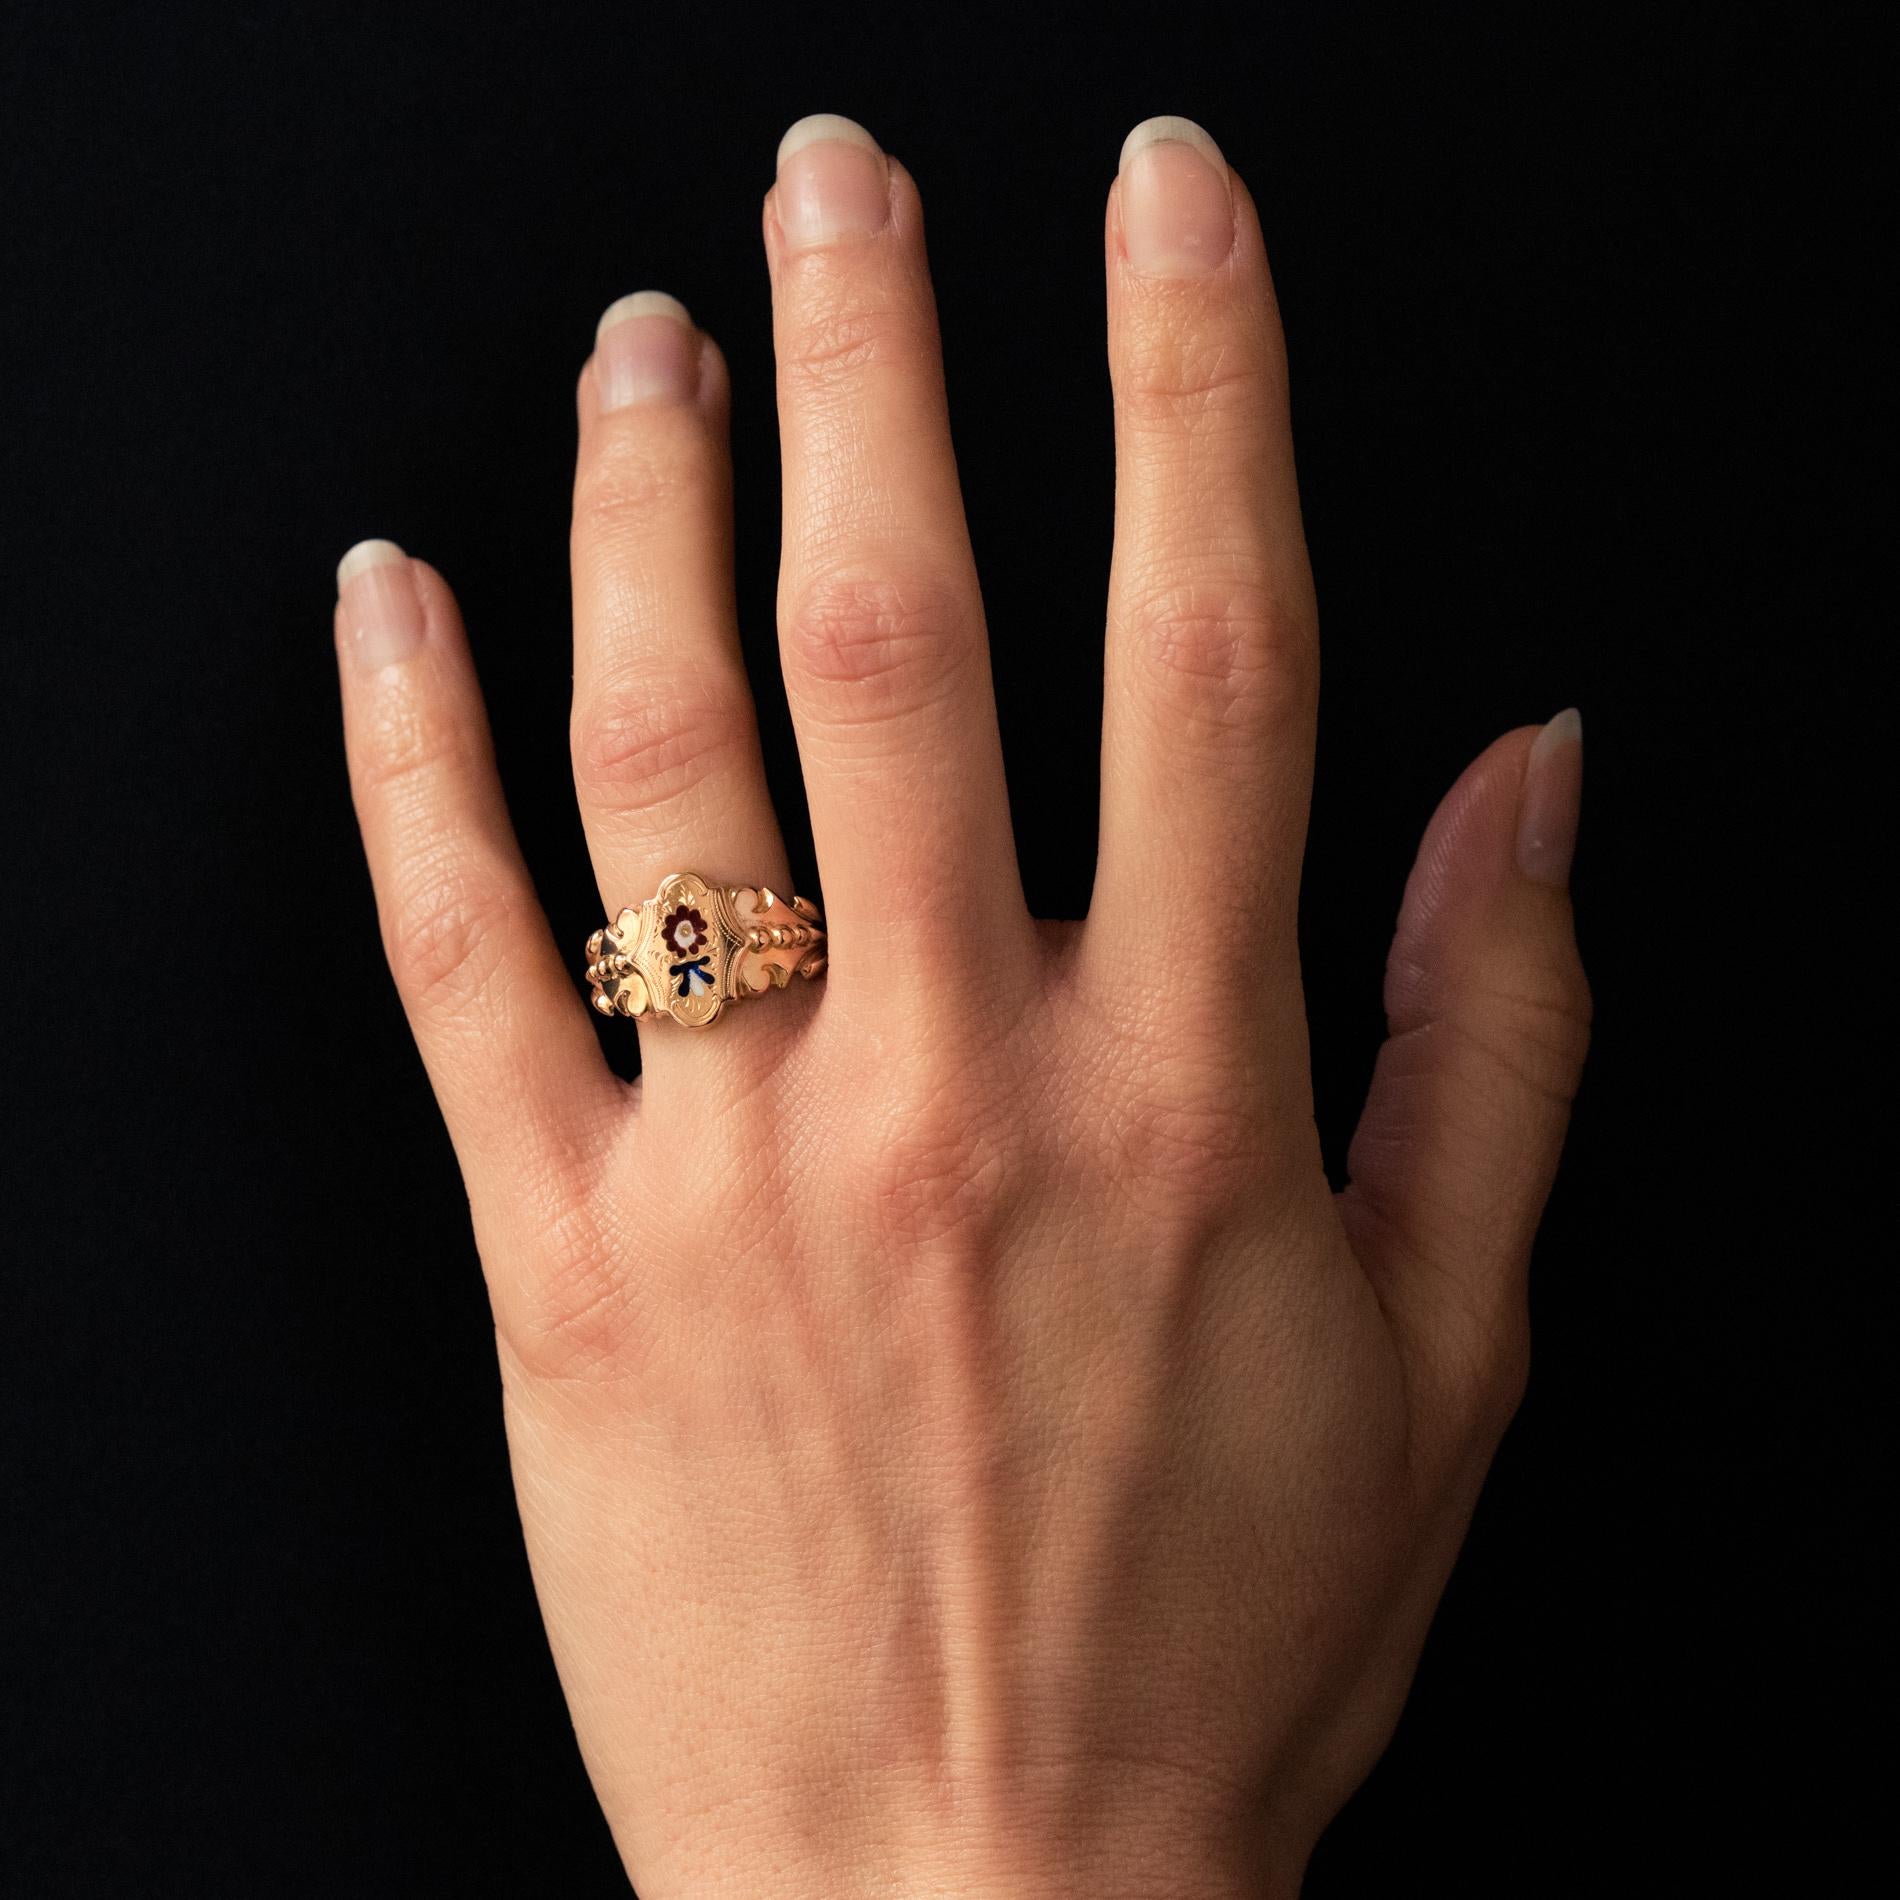 Ring in 18 karat rose gold, horse's head hallmark.
Superb ring, adorned on its top of a cartouche with an enameled and chiseled floral pattern. On both sides a beaded motif comes in the center of a foliage. The ring is faceted.
Height: 13.8 mm,